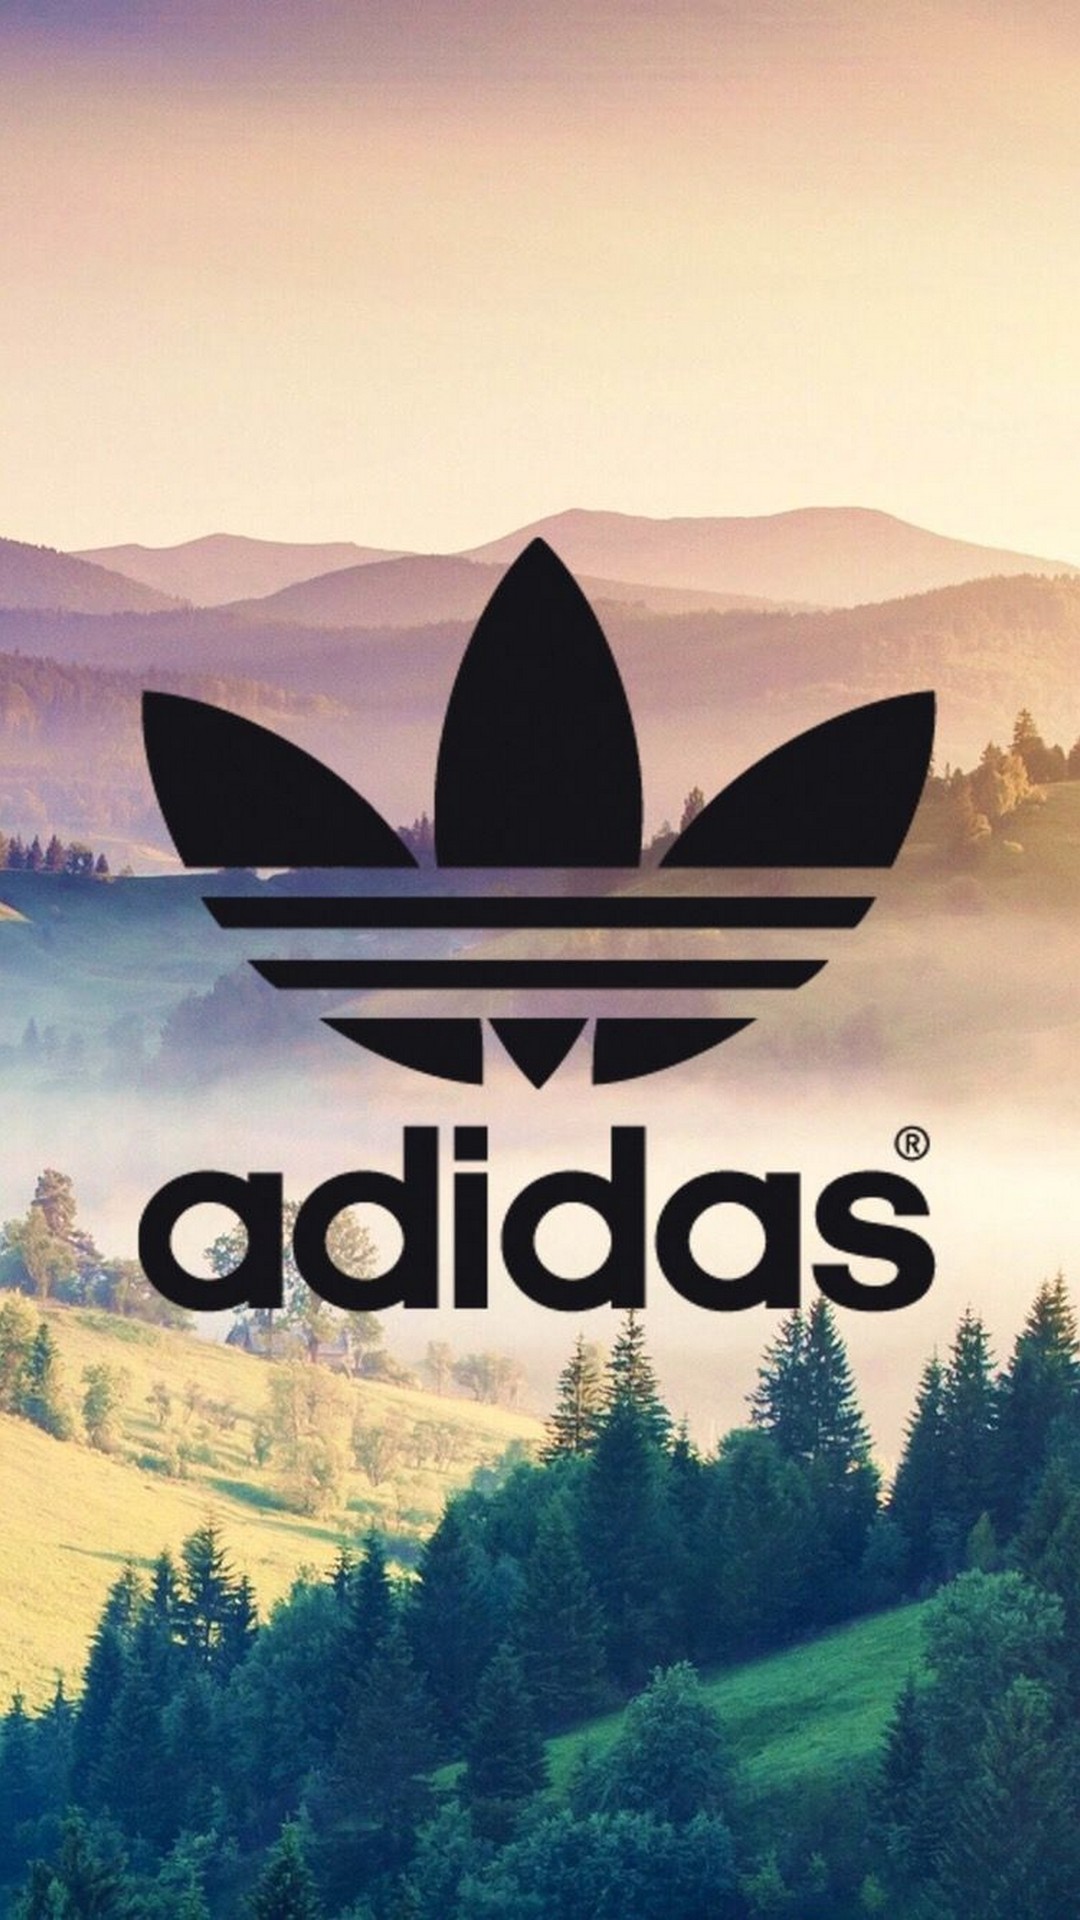 Free Download Wallpapers Iphone Adidas 19 3d Iphone Wallpaper 1080x19 For Your Desktop Mobile Tablet Explore 52 Adidas Wallpapers For Iphone Adidas Logo Wallpaper Adidas Wallpapers 19 X 1080 Cool Adidas Wallpapers